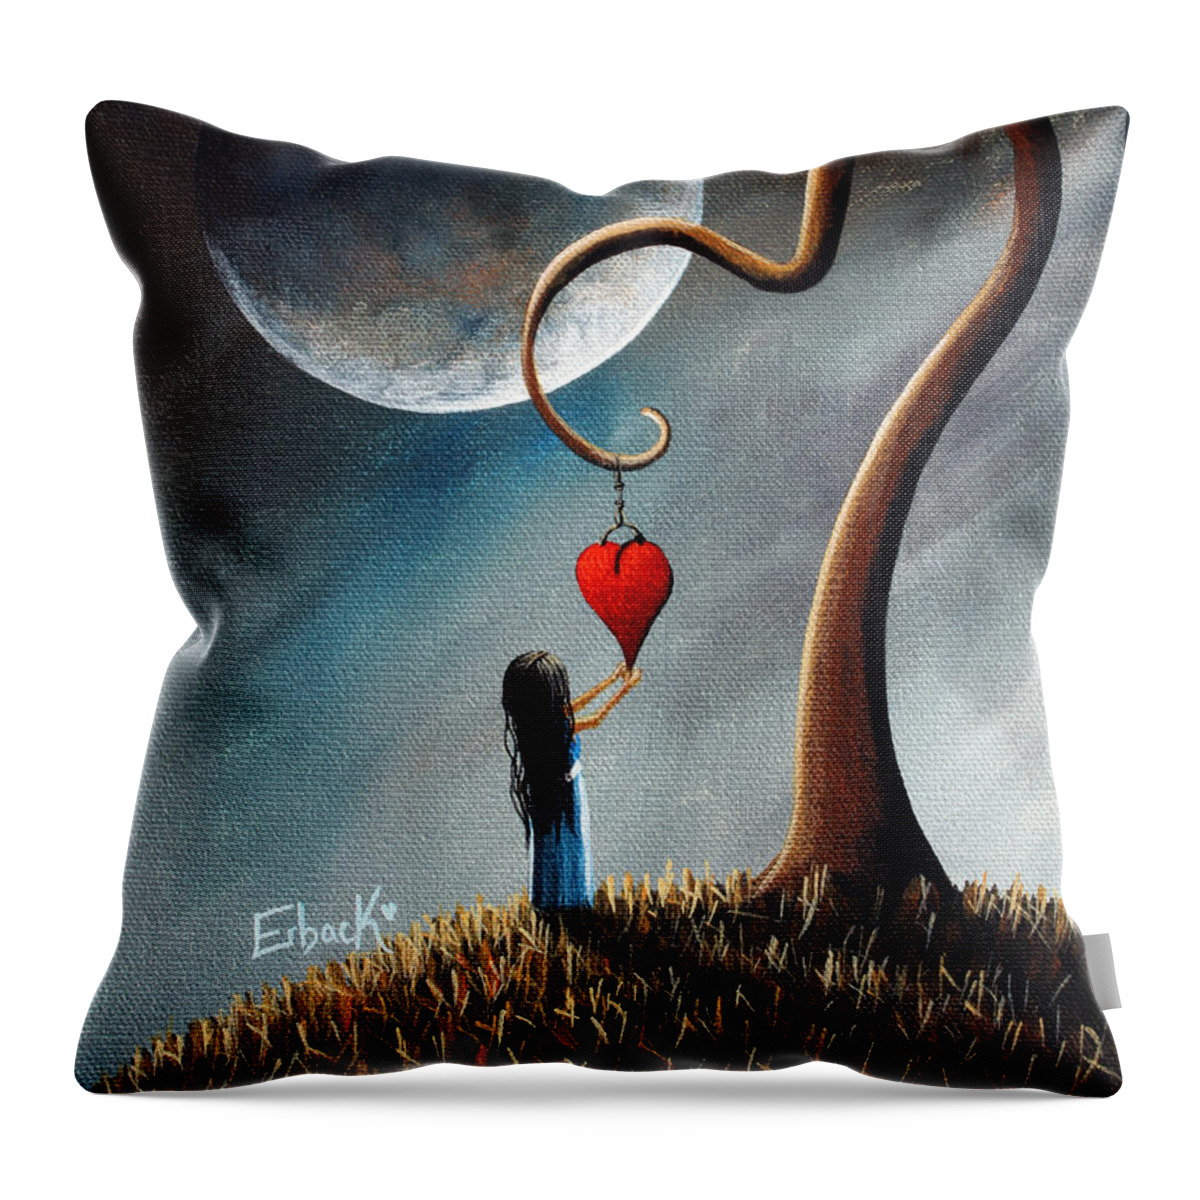 Abstract Throw Pillow featuring the painting Dreamy Surreal Original Landscape Painting by Moonlight Art Parlour